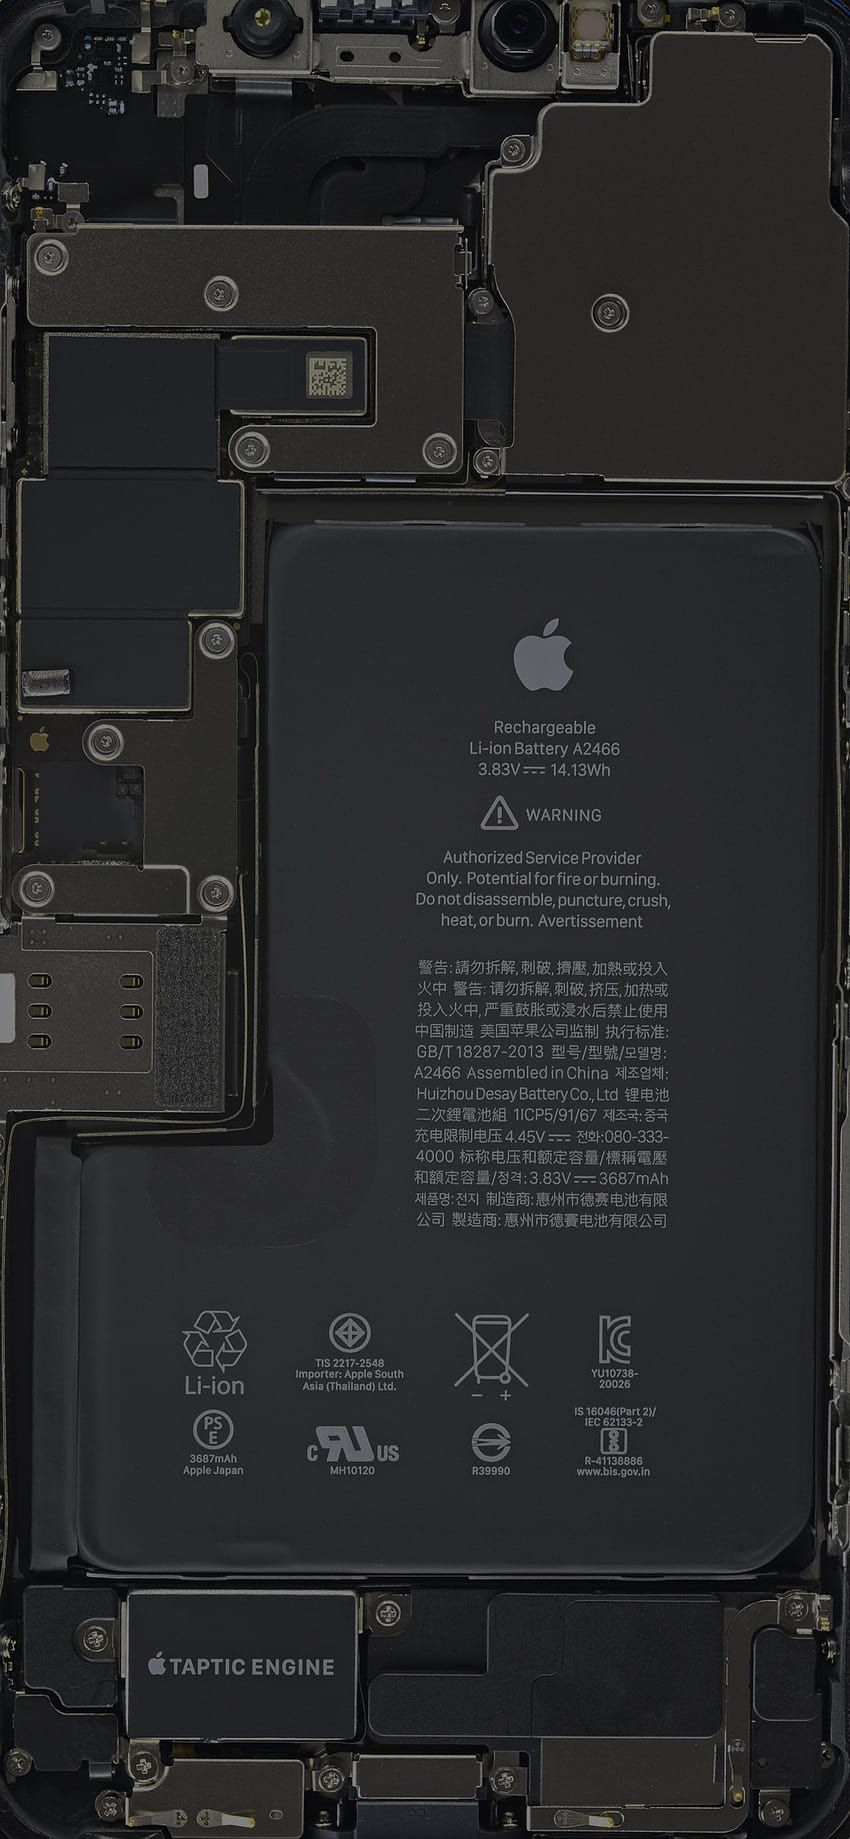 iPhone 11 11 Pro and 11 Pro Max Teardown Wallpapers  iFixit News